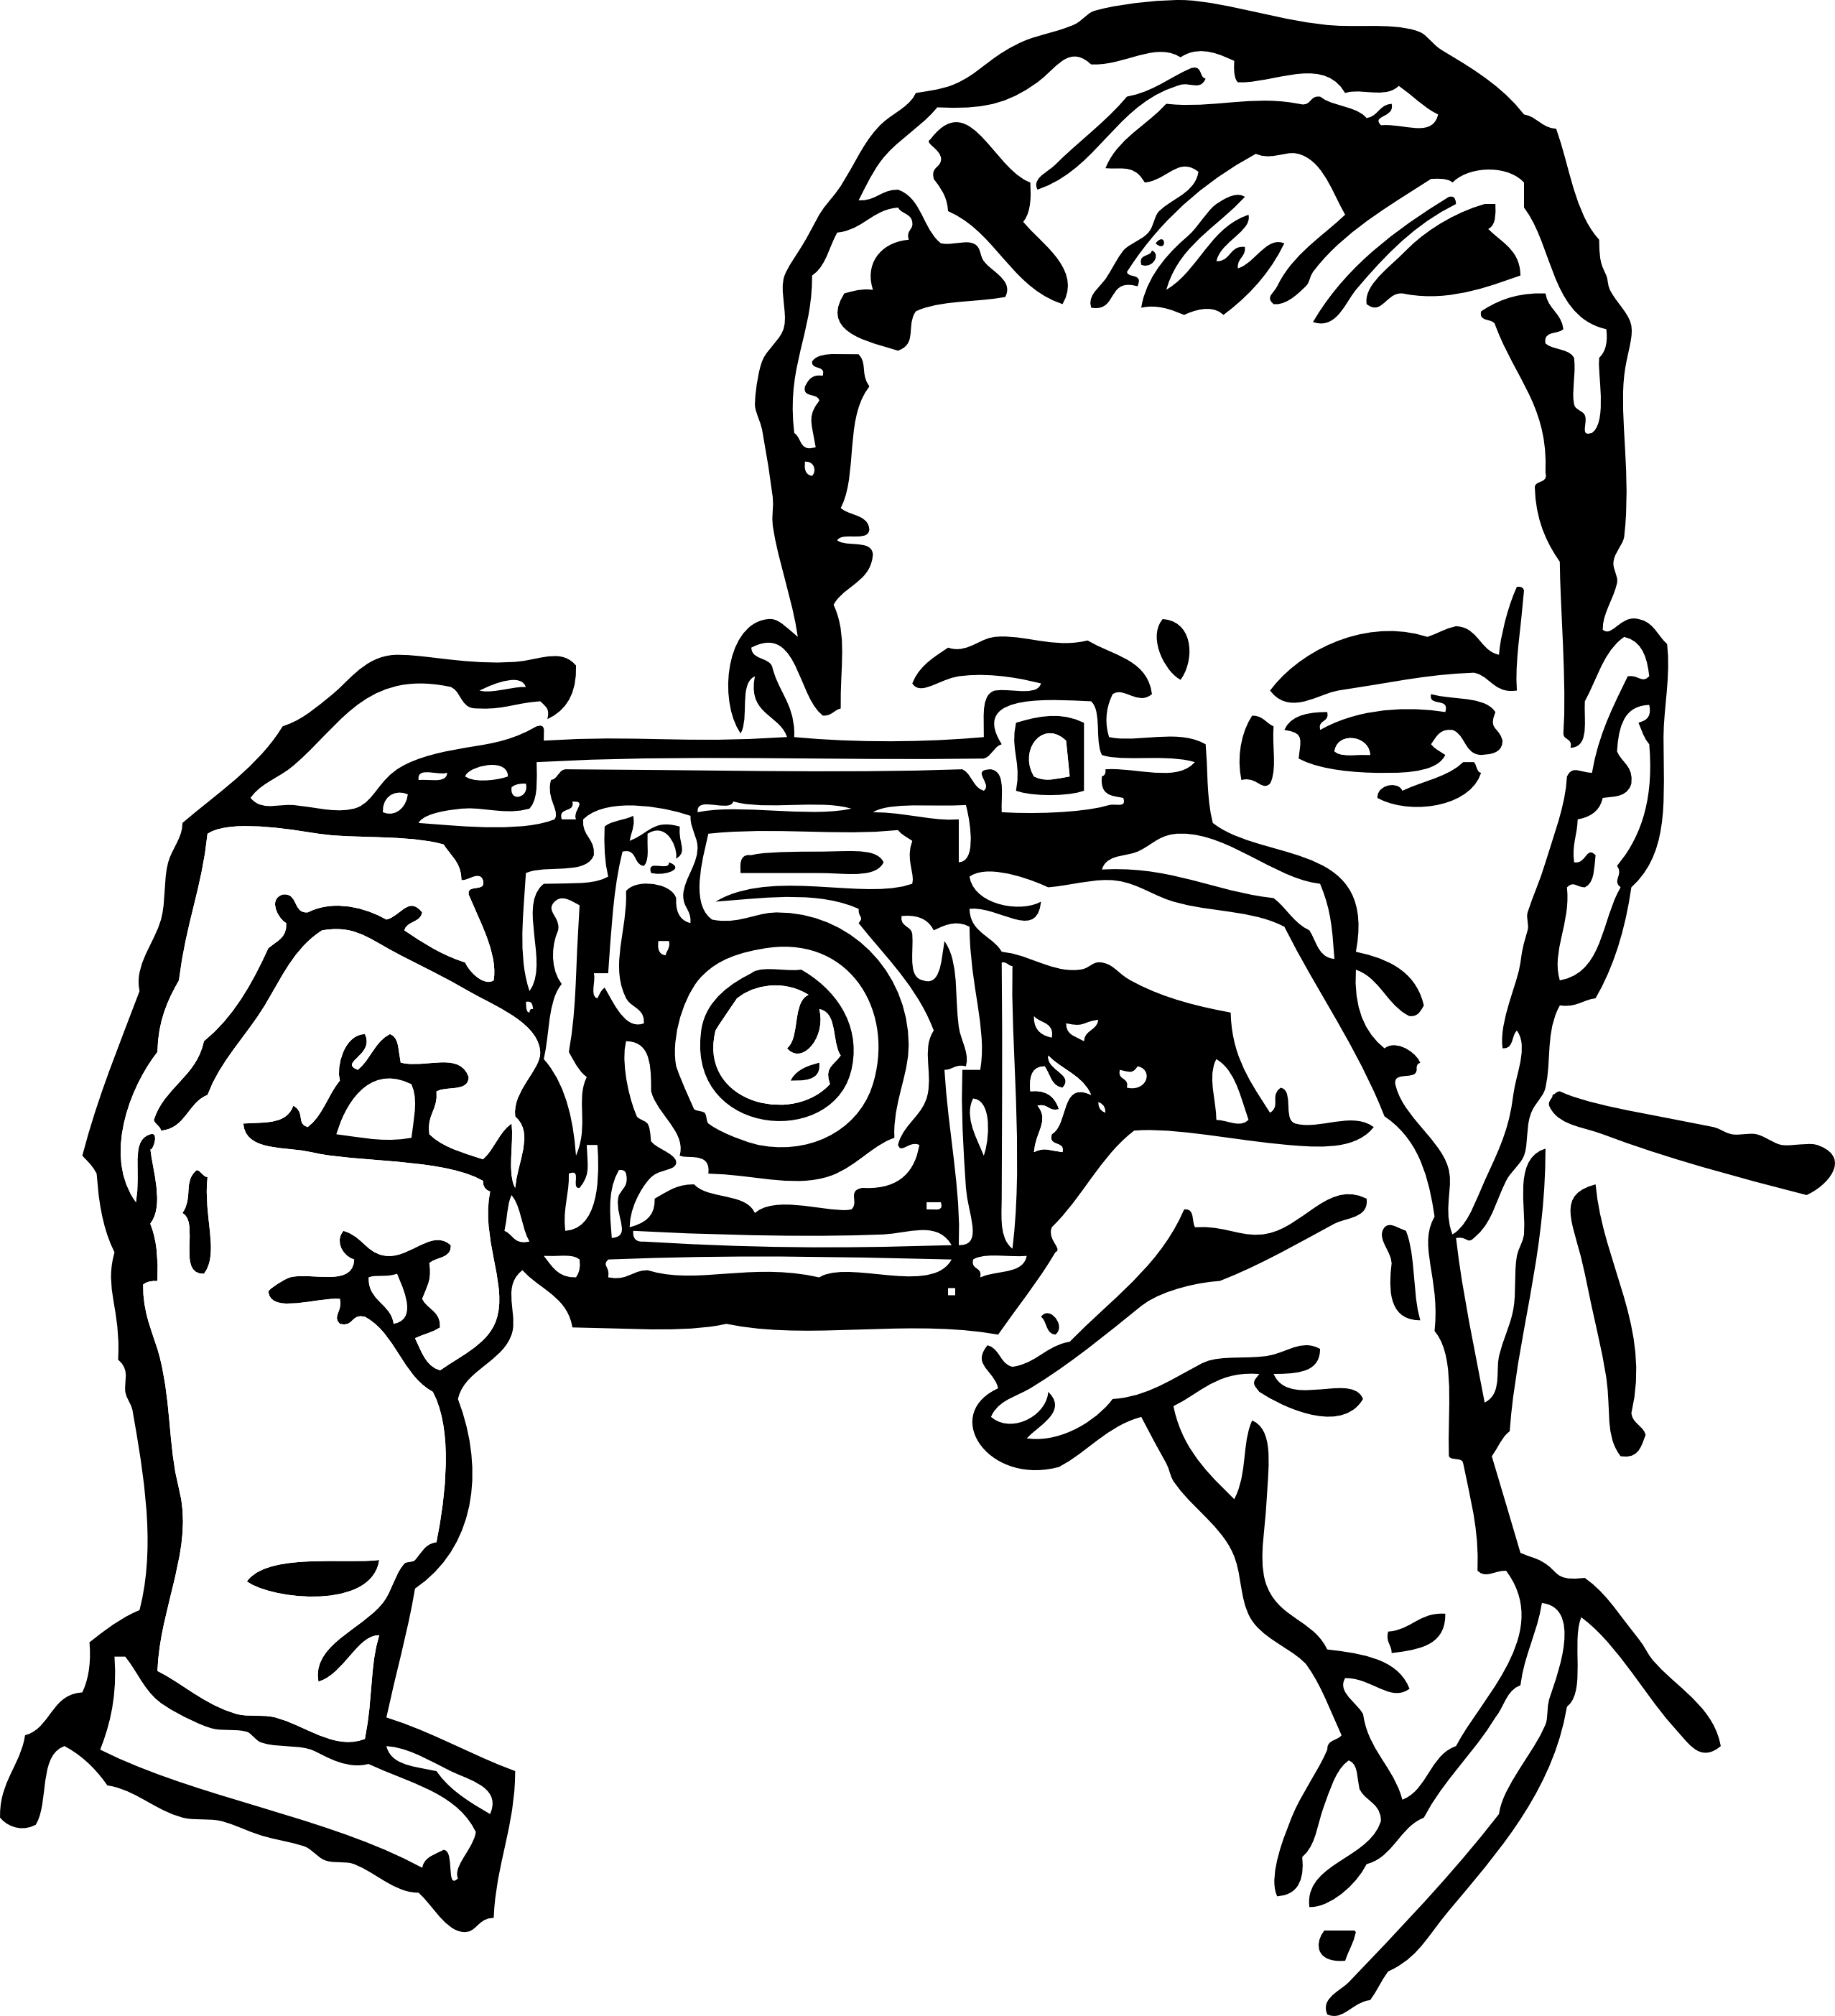 Camera Clipart Black And White Png   Clipart Panda   Free Clipart